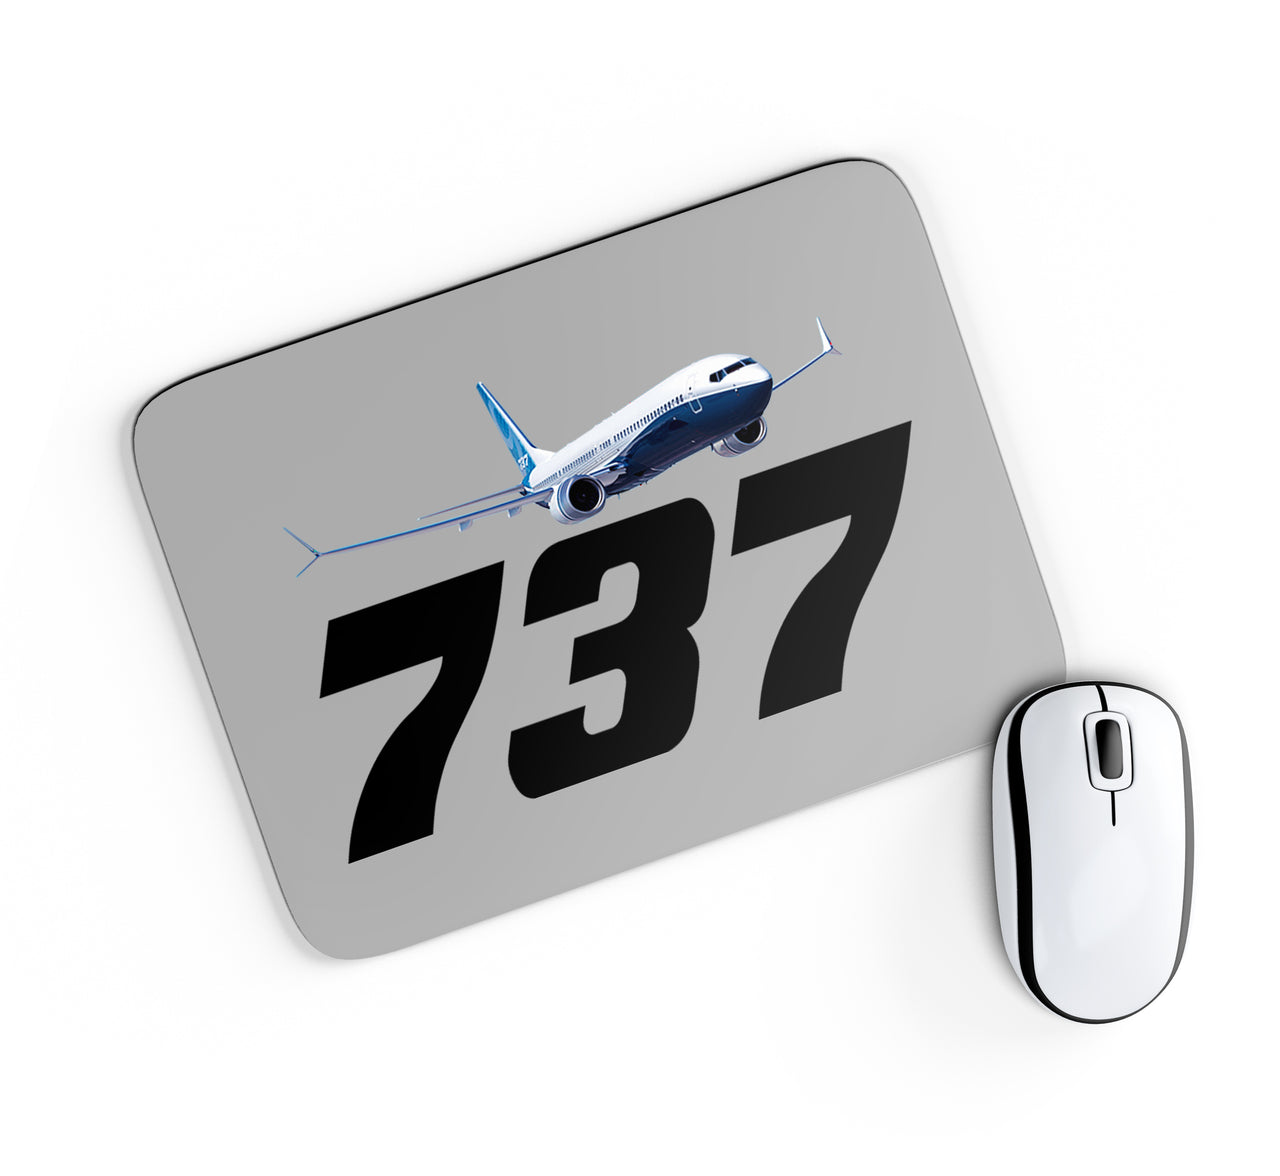 Super Boeing 737-800 Designed Mouse Pads